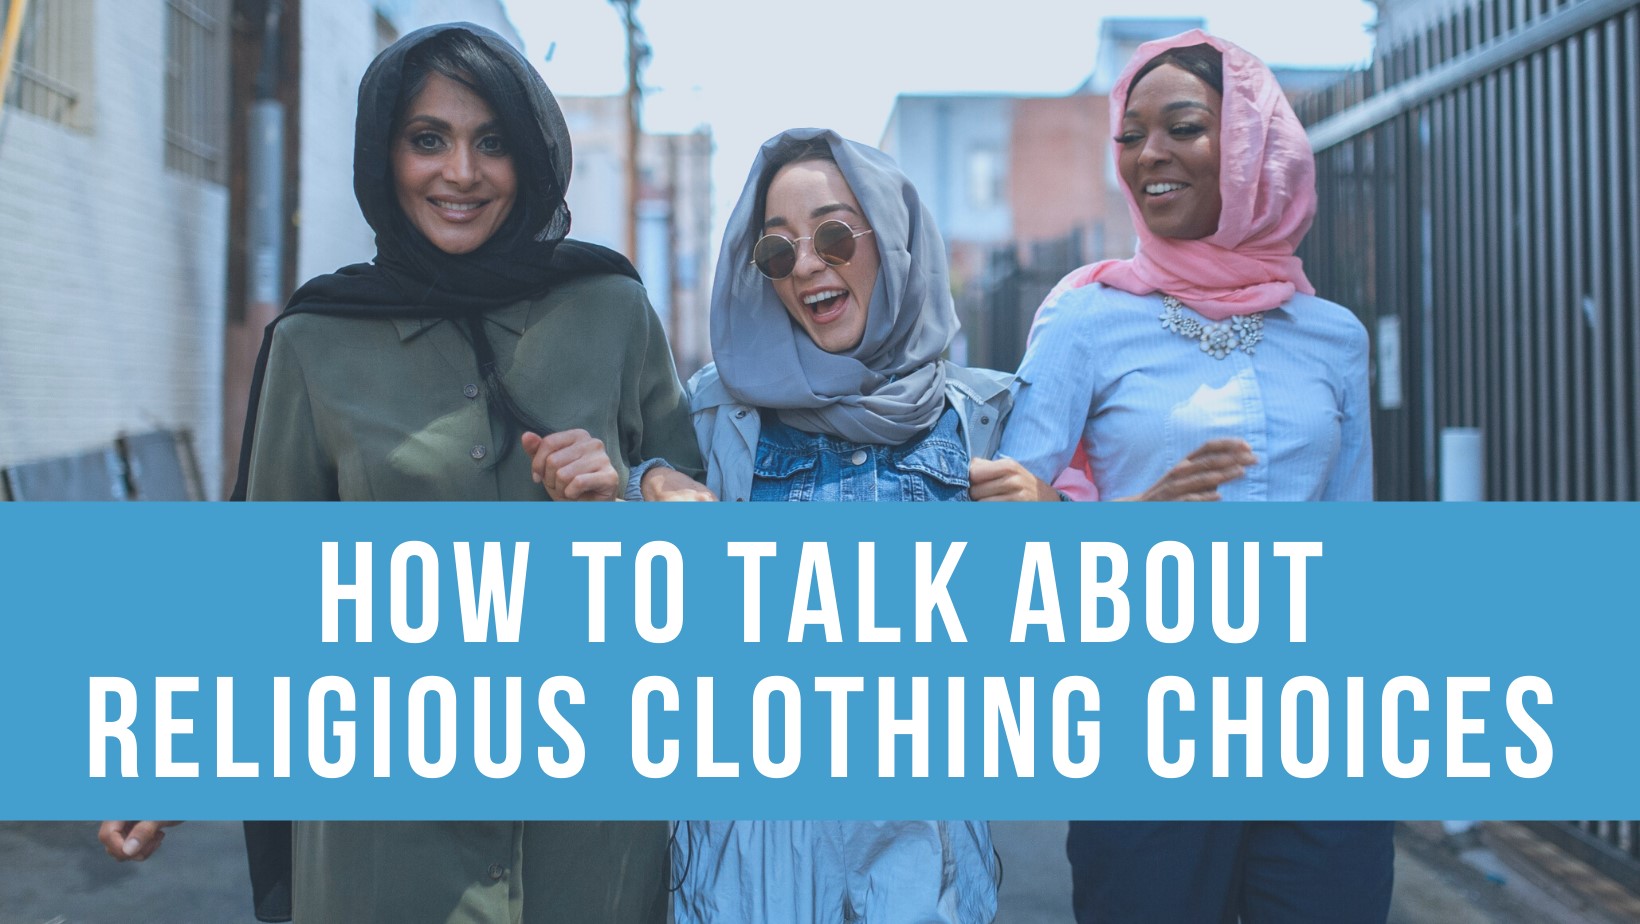 How to talk about religious clothing choices